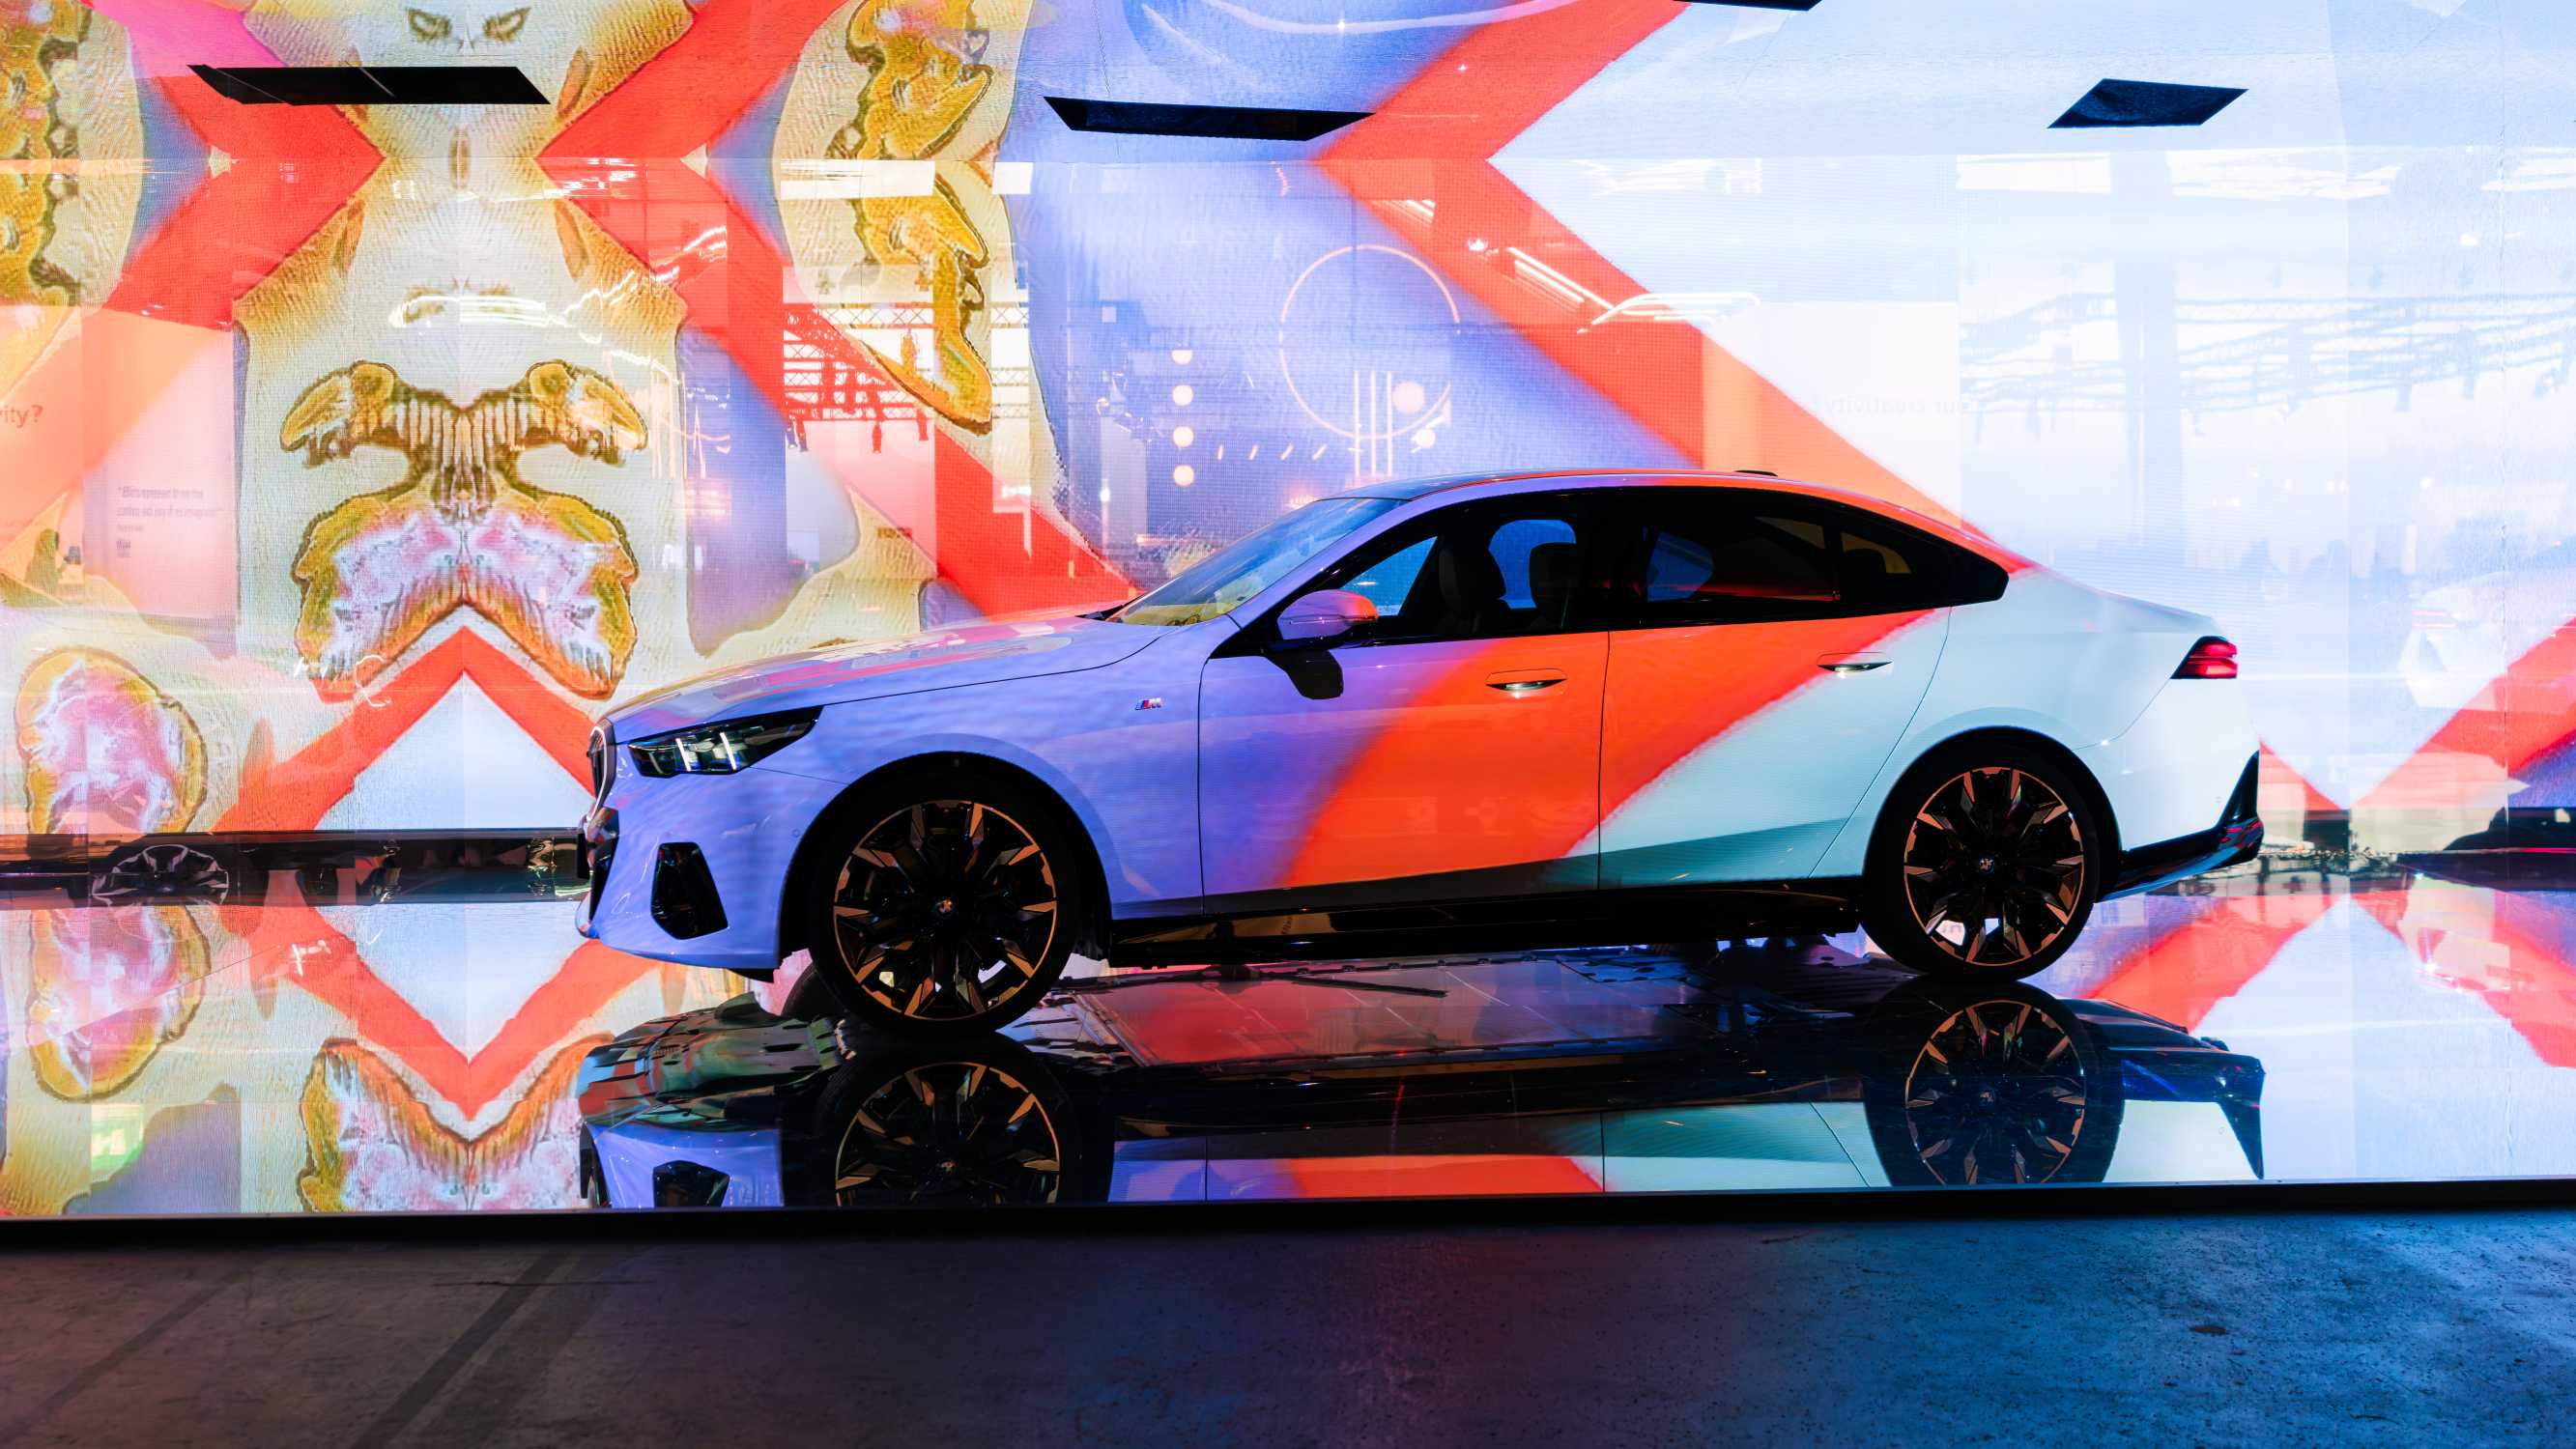 The Electric AI Canvas at Art Basel in Basel 2023. An installation inspired by the new BMW i5. Featuring Eric N. Mack, 2023. (06/2023)